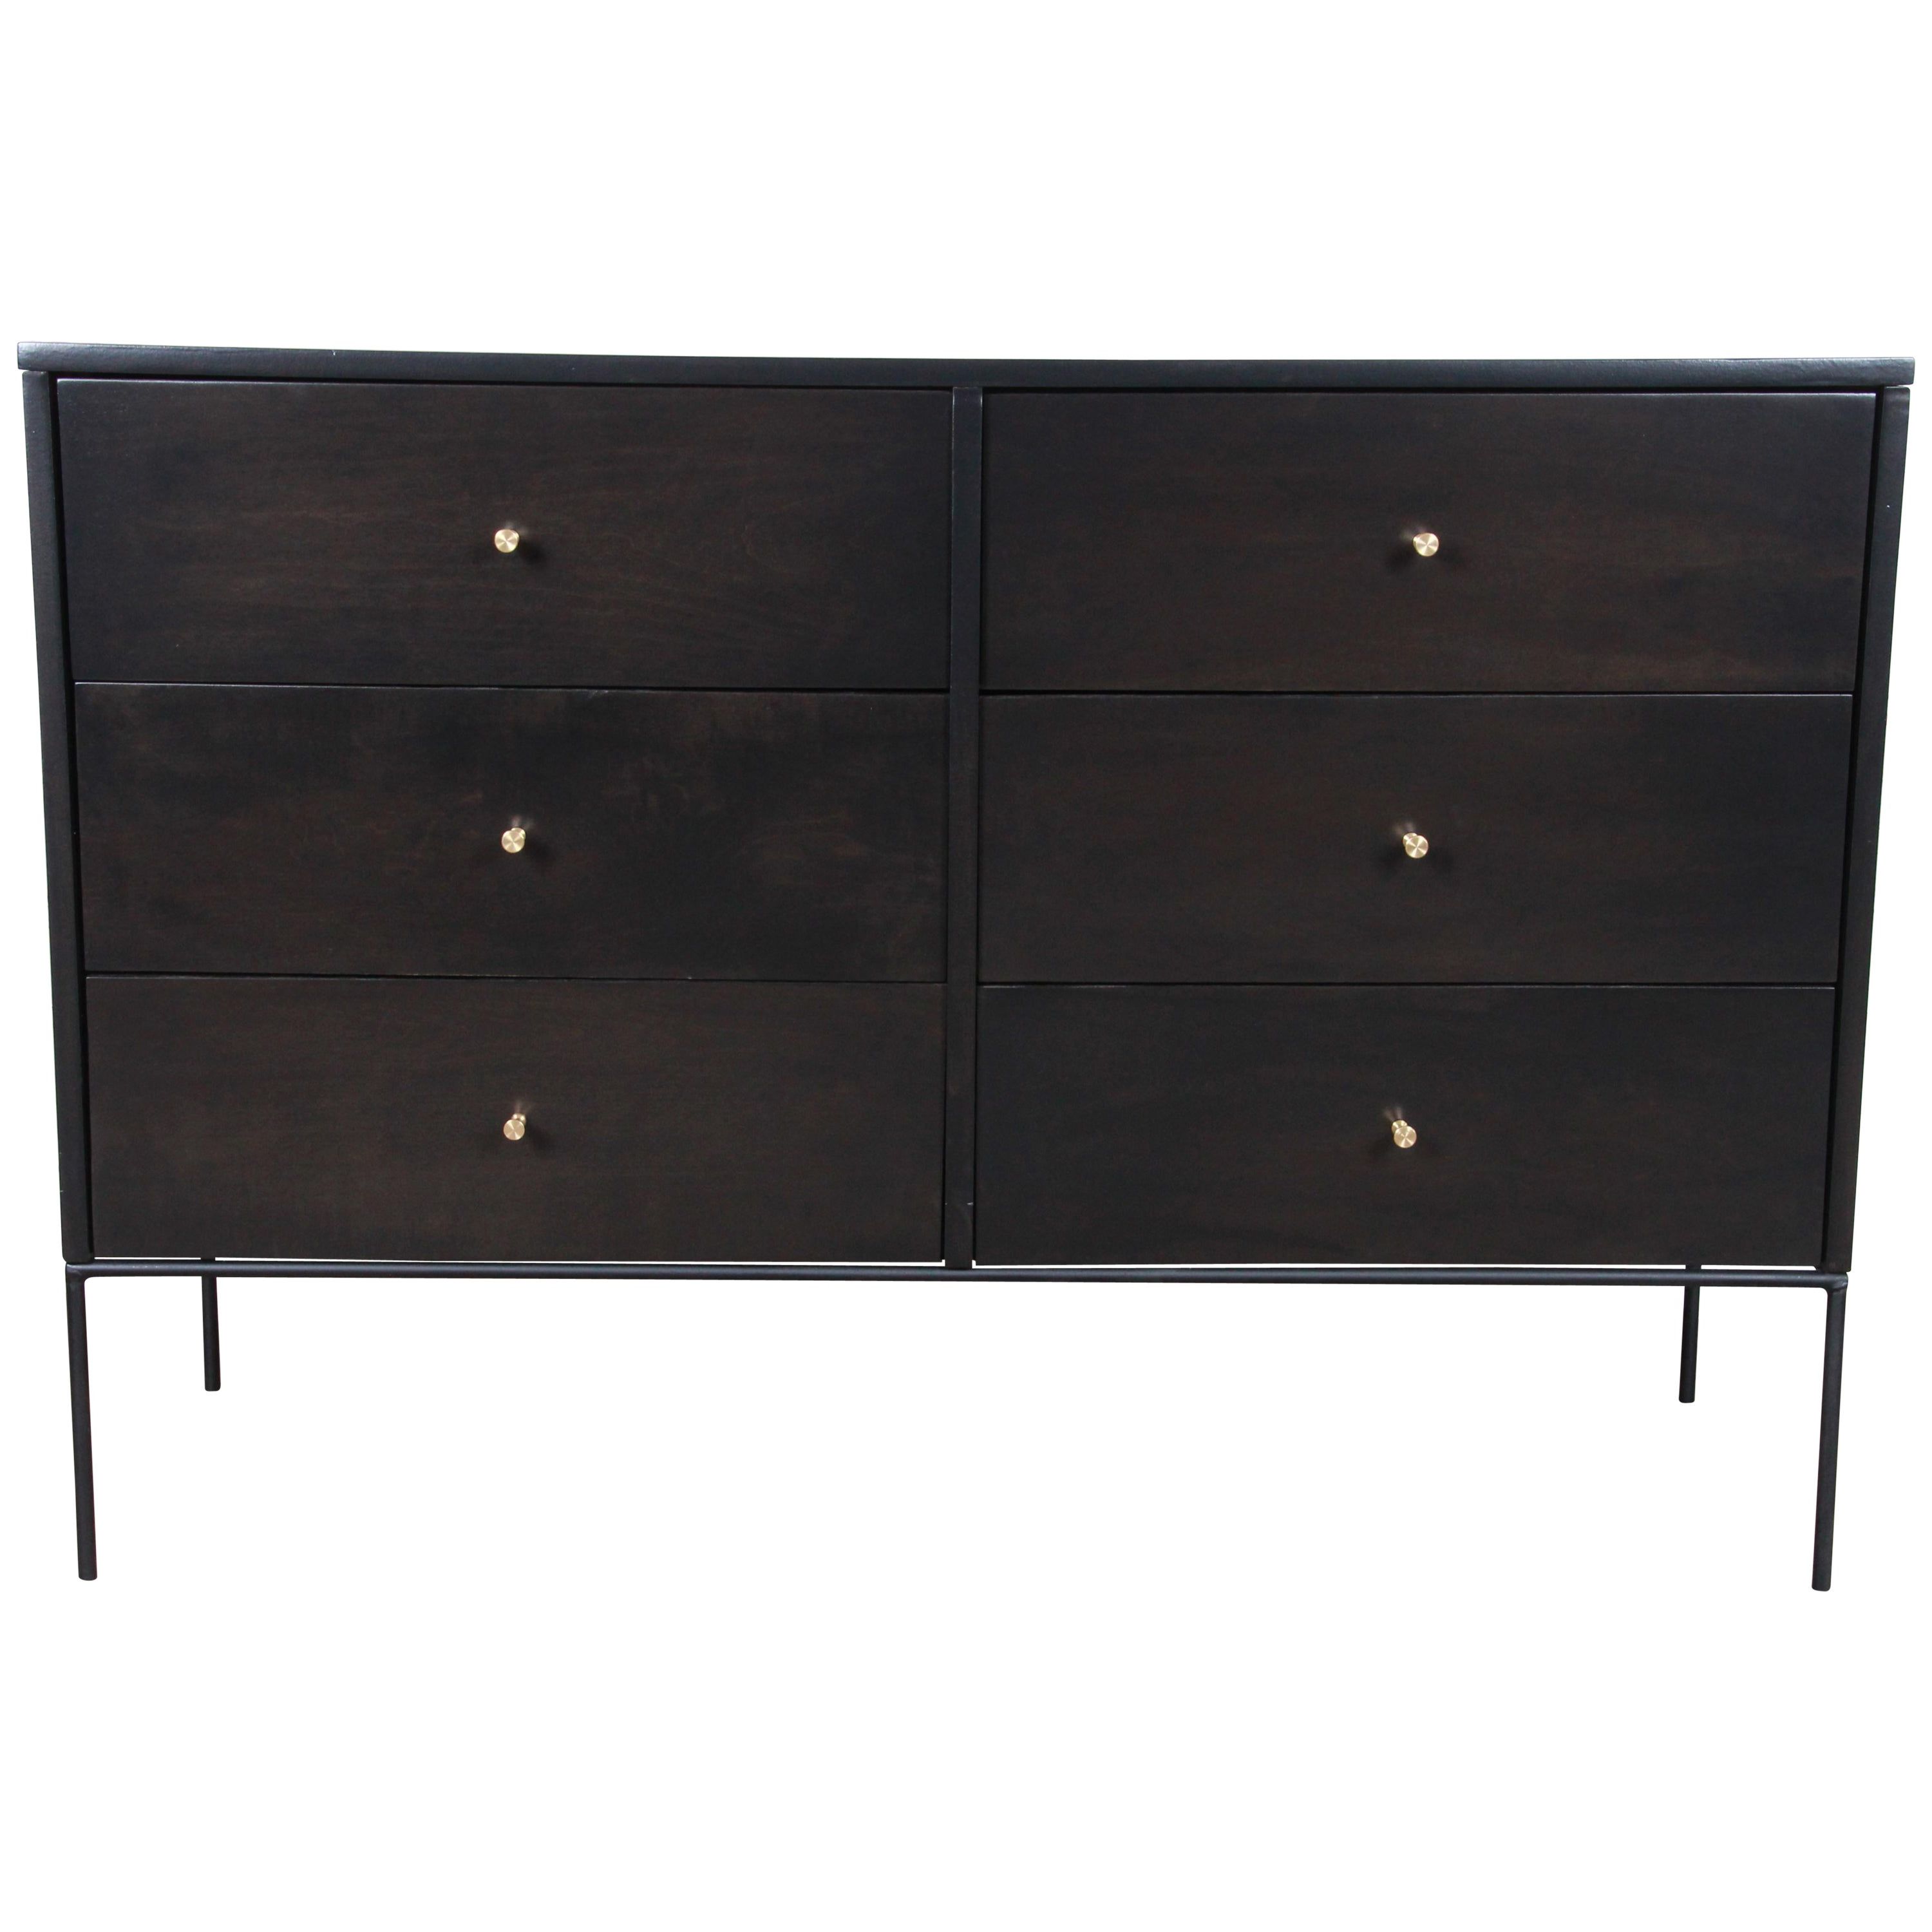 Paul Mccobb Planner Group Iron Base Ebonized Six Drawer Dresser Or Credenza With Regard To Line Geo Credenzas (View 11 of 20)